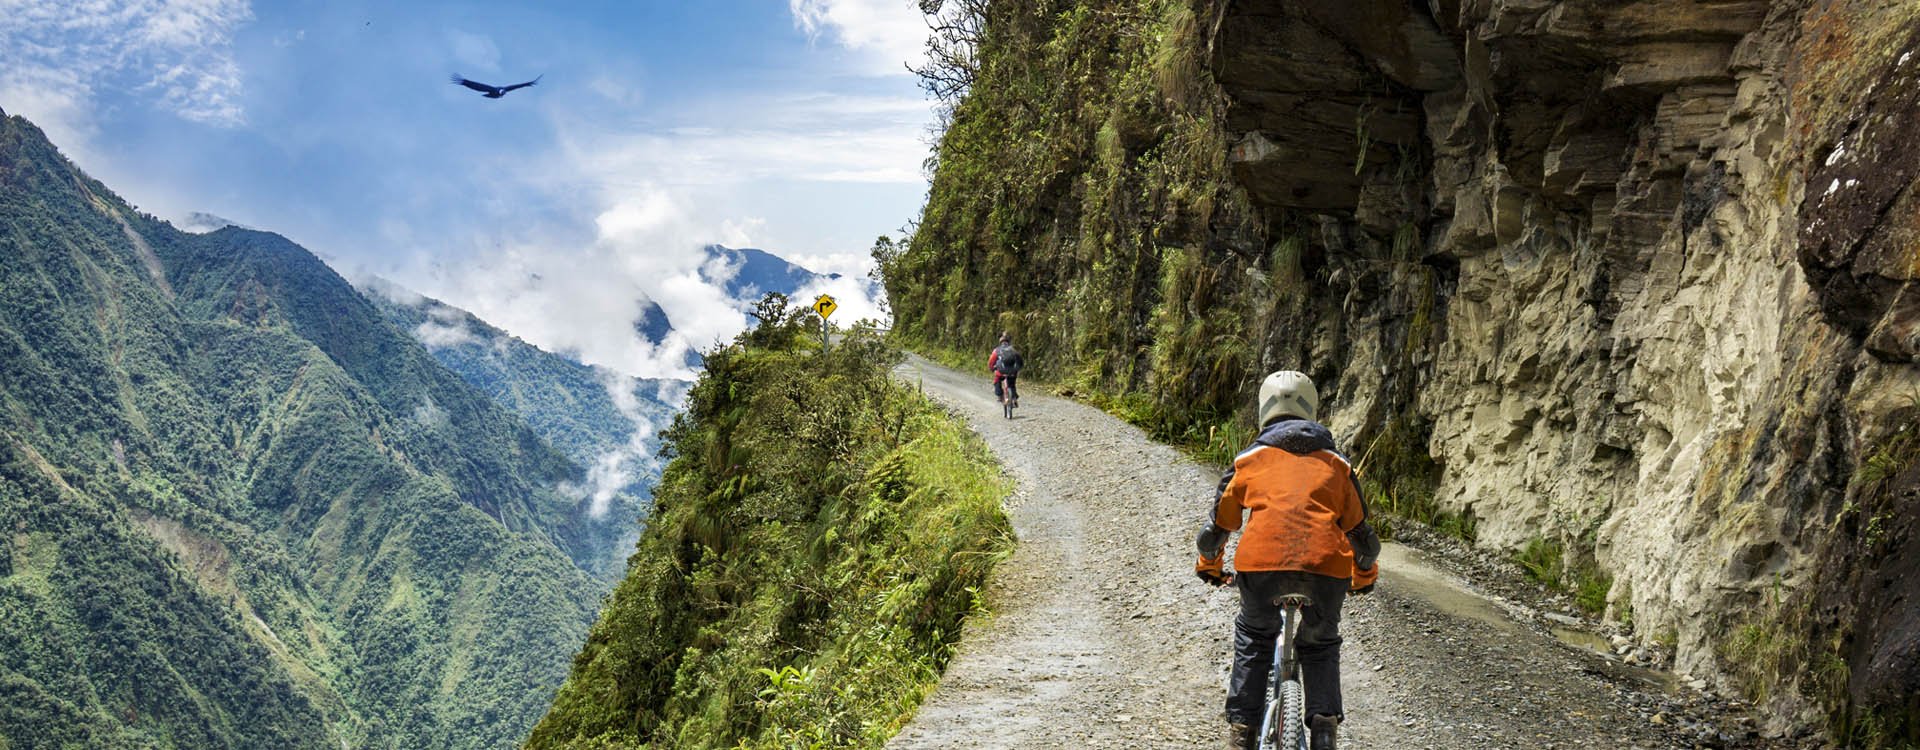 Bike adventure travel photo. Bike tourists ride on the "road of death" downhill track in Bolivia. In the background sky circles a condor over the scene.